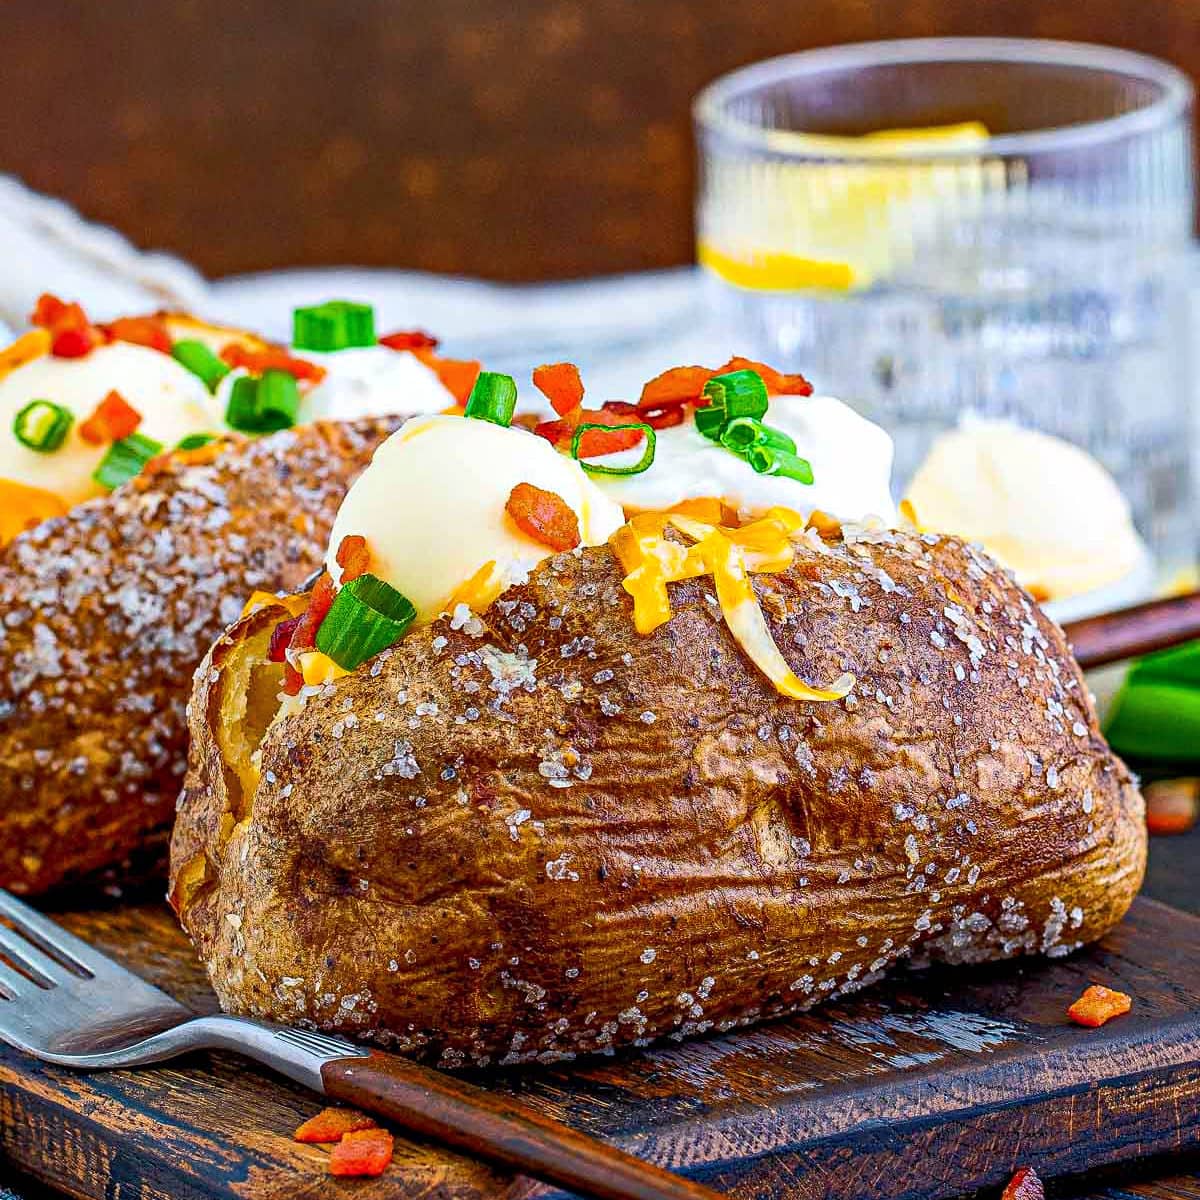 Perfect Baked Potato Recipe  How to Bake Potato in the Oven